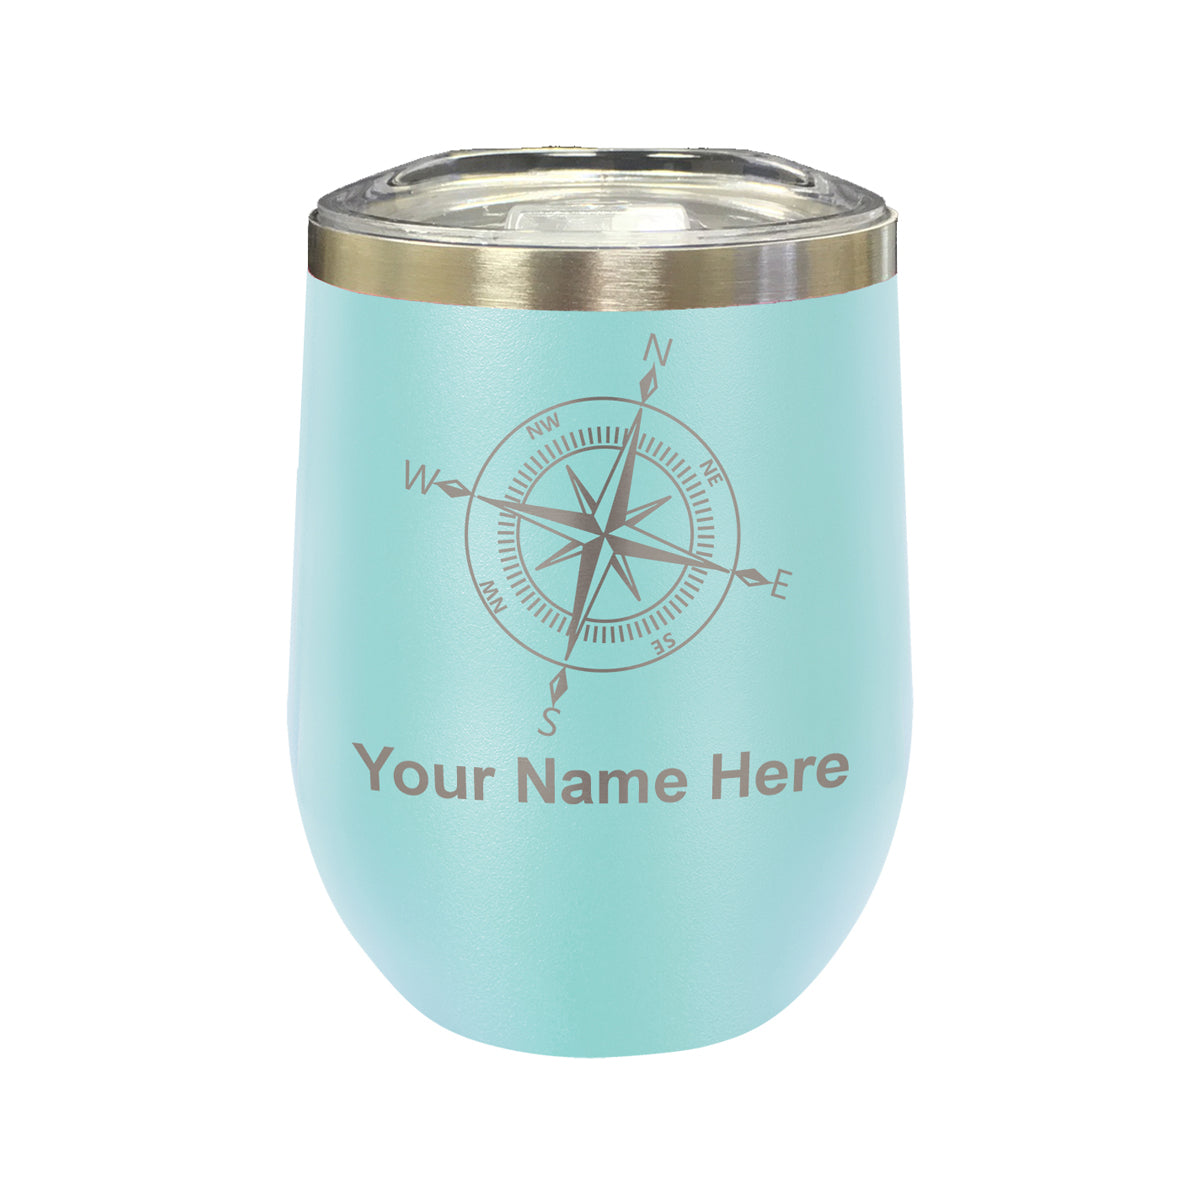 LaserGram Double Wall Stainless Steel Wine Glass, Compass Rose, Personalized Engraving Included